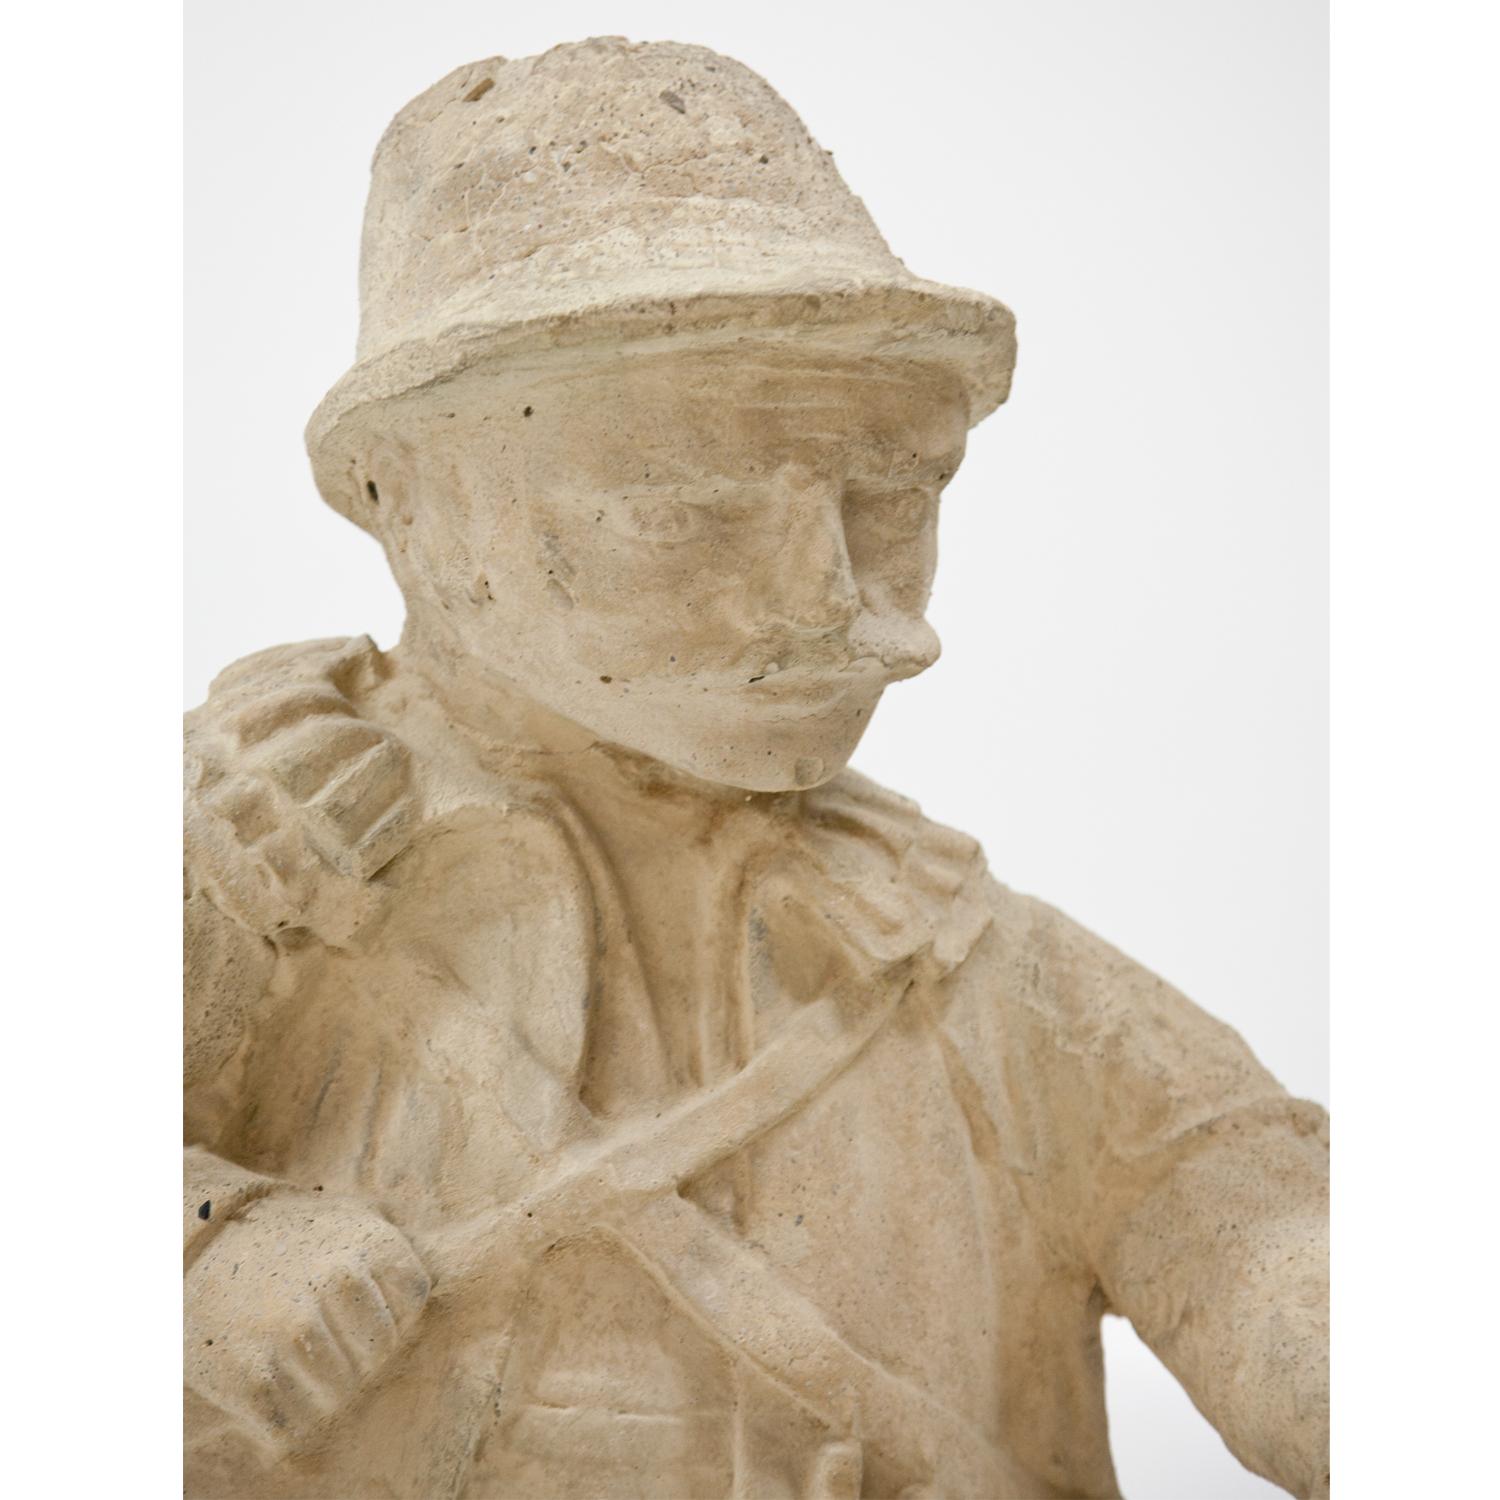 Garden figure of a hunter with rifle out of cast stone and painted beige.